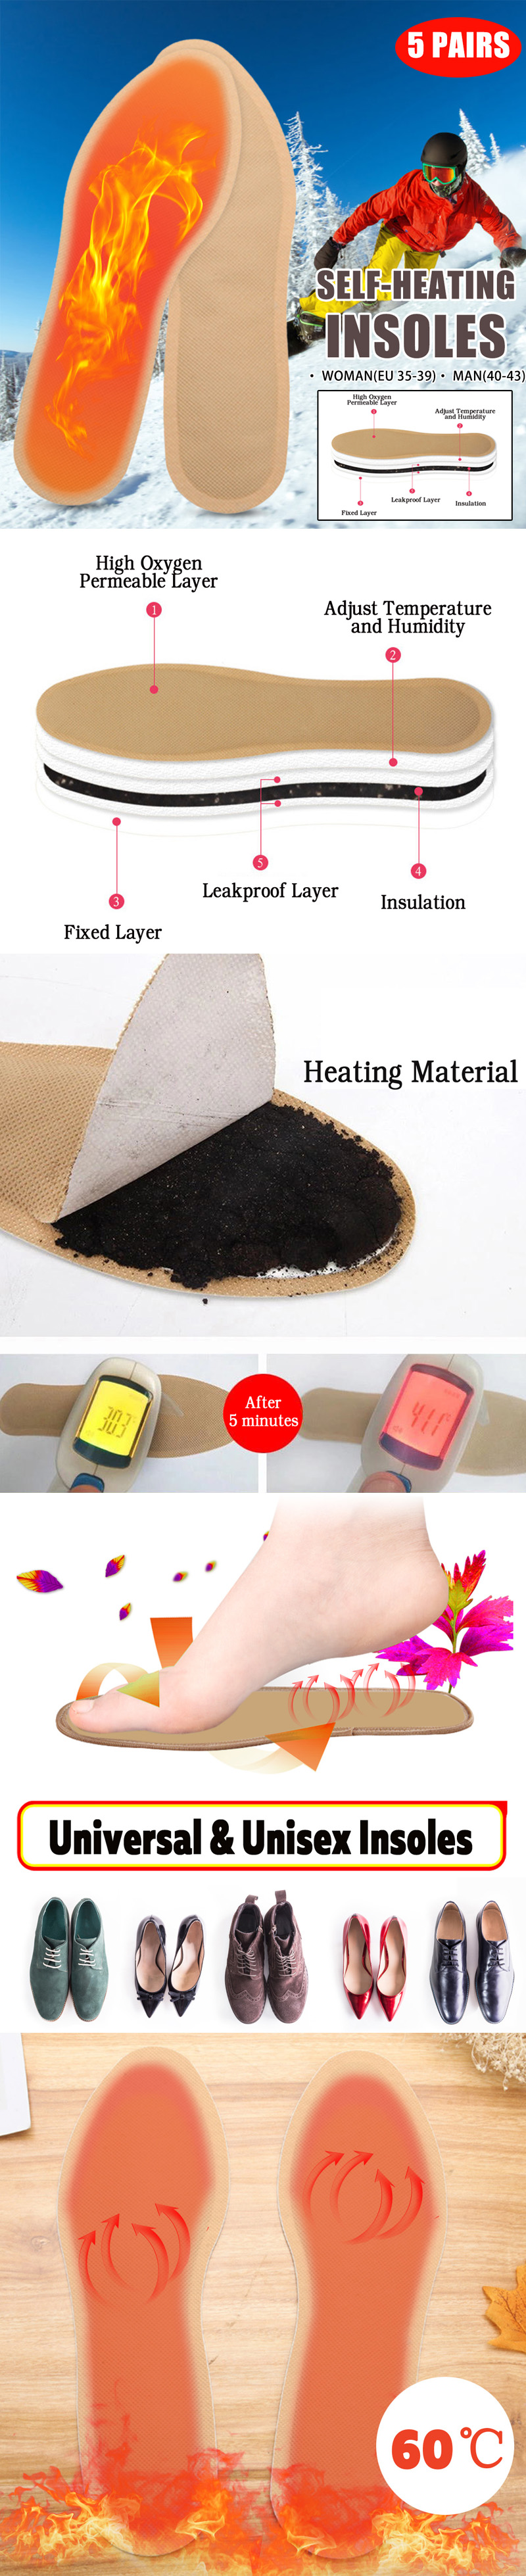 5-Pairs-Heated-Insole-Electric-Heated-Feet-Shoe-Insole-Warmer-Breathable-Foot-Heater-Insole-1419823-1